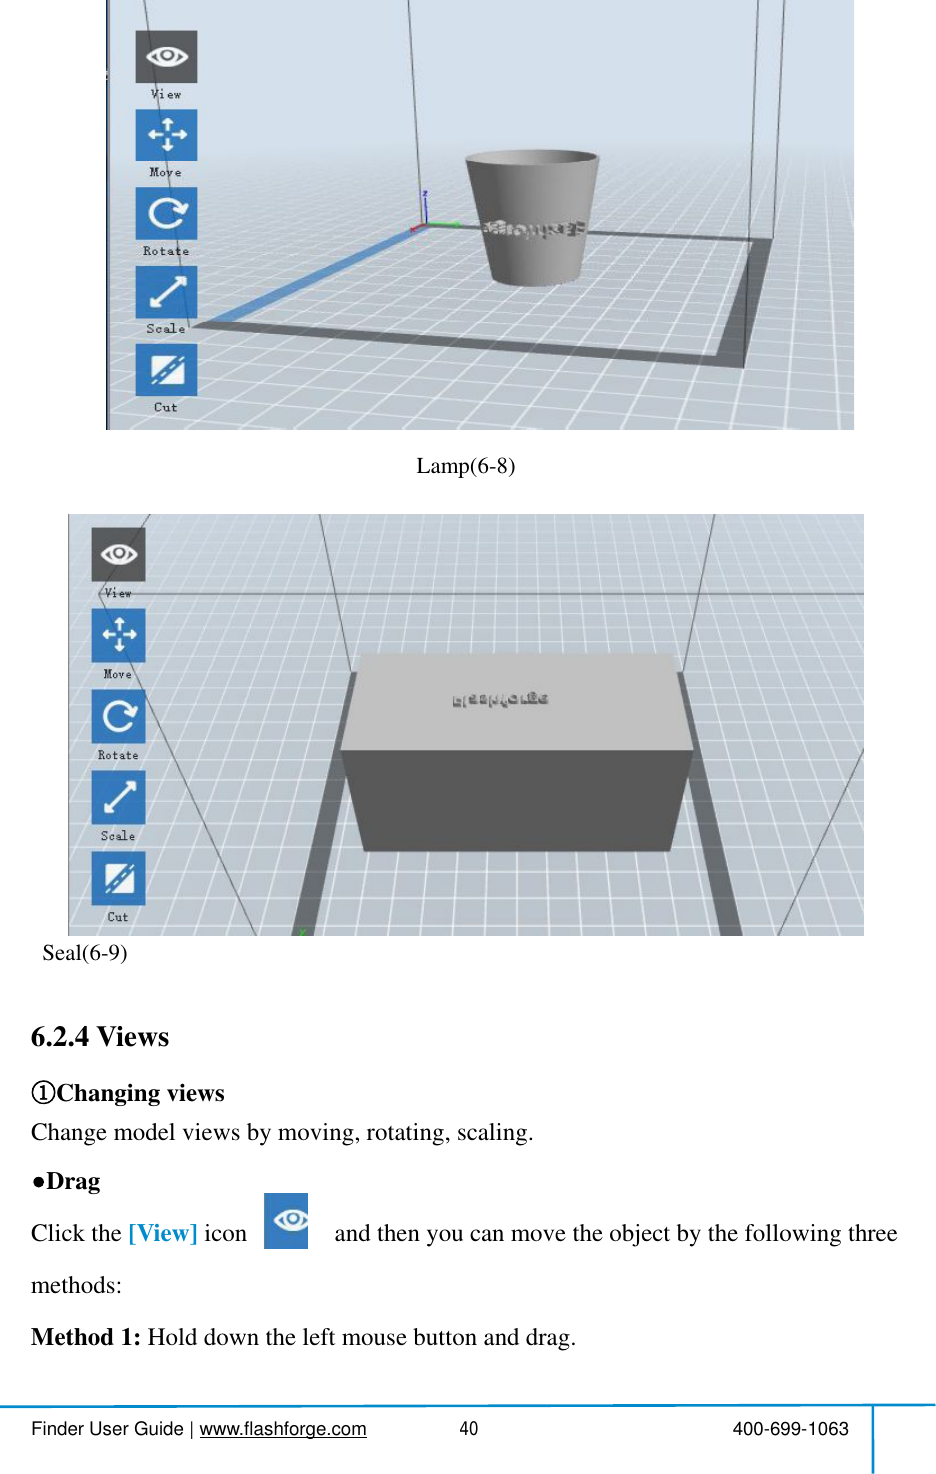  Finder User Guide|www.flashforge.com 400-699-106340Lamp(6-8)Seal(6-9)6.2.4ViewsChanging viewsChangemodel views bymoving,rotating, scaling.DragClickthe [View] icon andthen you canmovethe object bythefollowingthreemethods:Method 1: Hold downtheleftmouse button and drag.